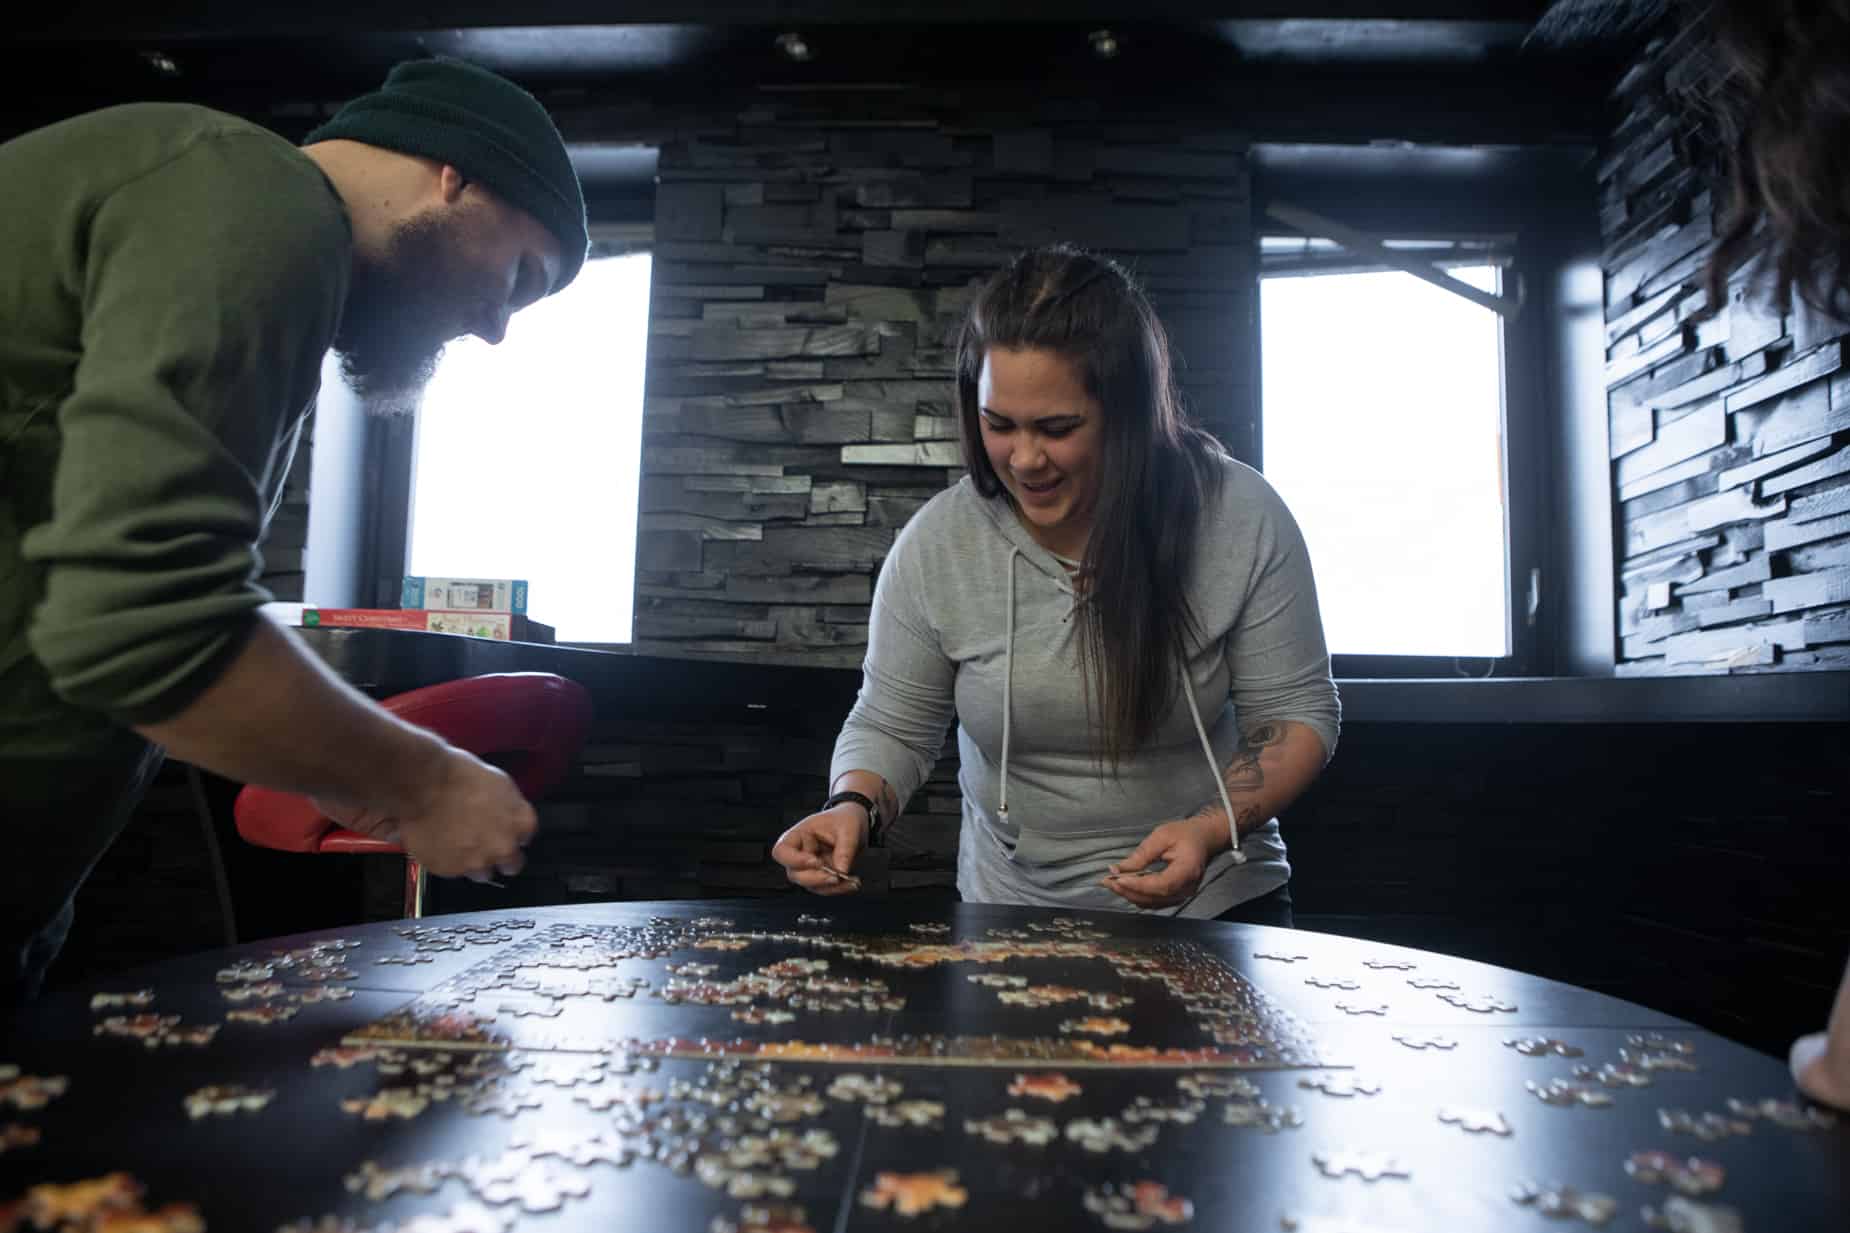 PLATO employees doing a puzzle together